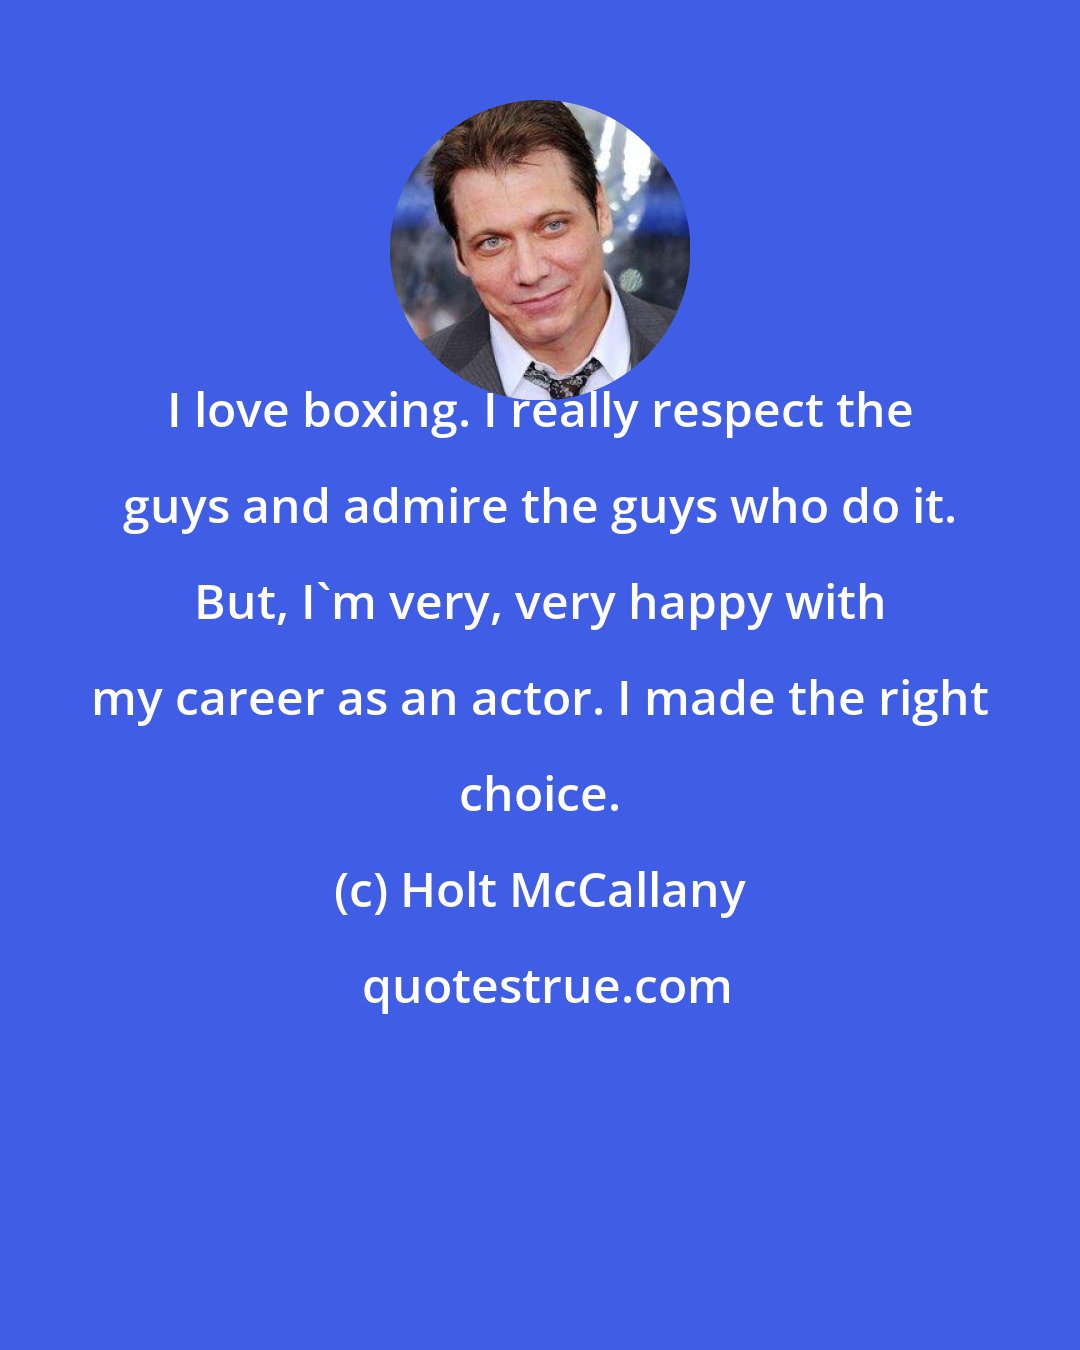 Holt McCallany: I love boxing. I really respect the guys and admire the guys who do it. But, I'm very, very happy with my career as an actor. I made the right choice.